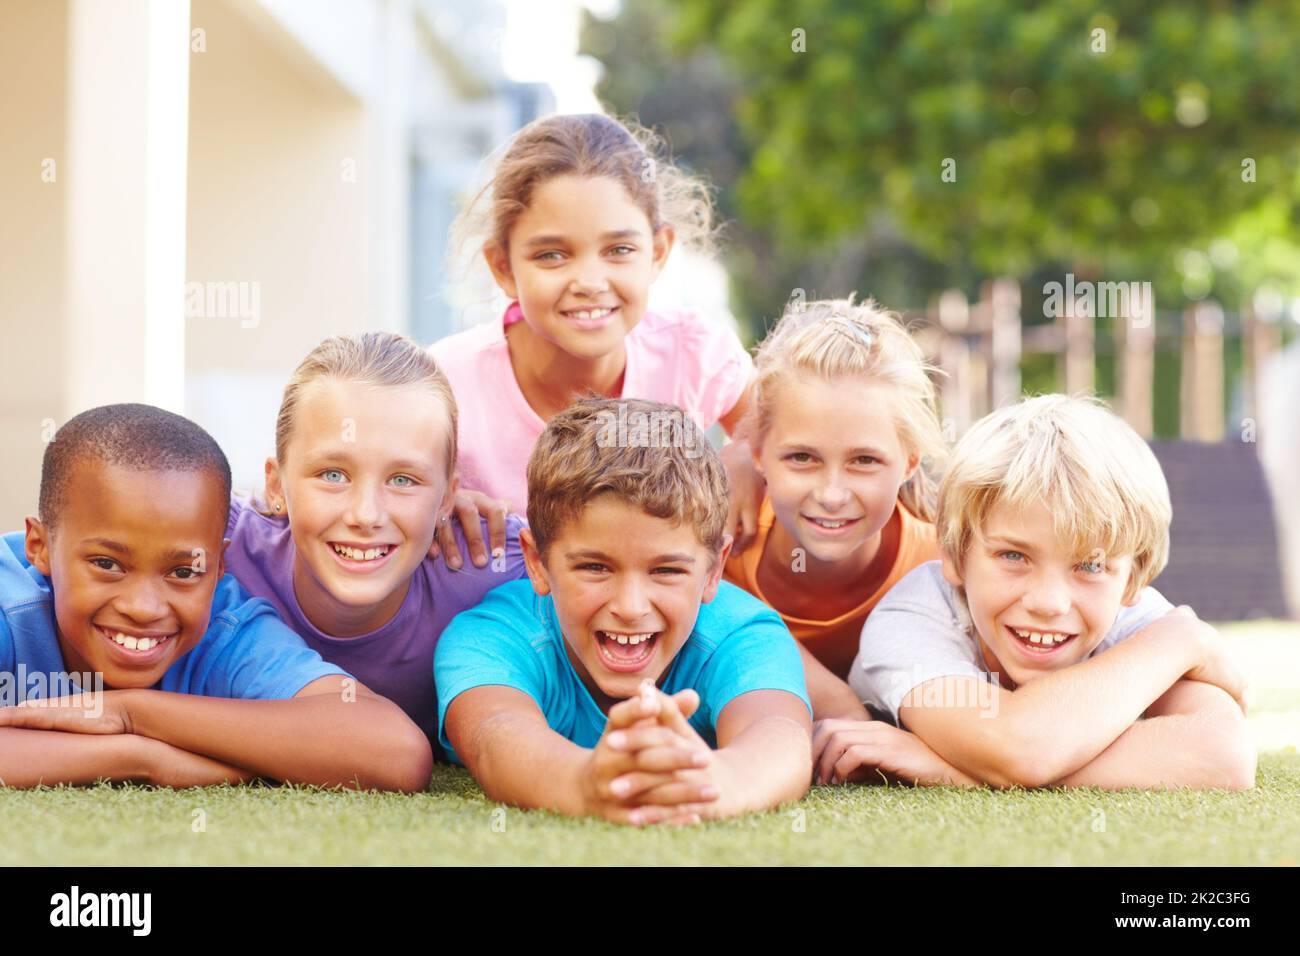 We love having fun together after school. Group portrait of happy school kids lying in a pile outside in the sun. Stock Photo